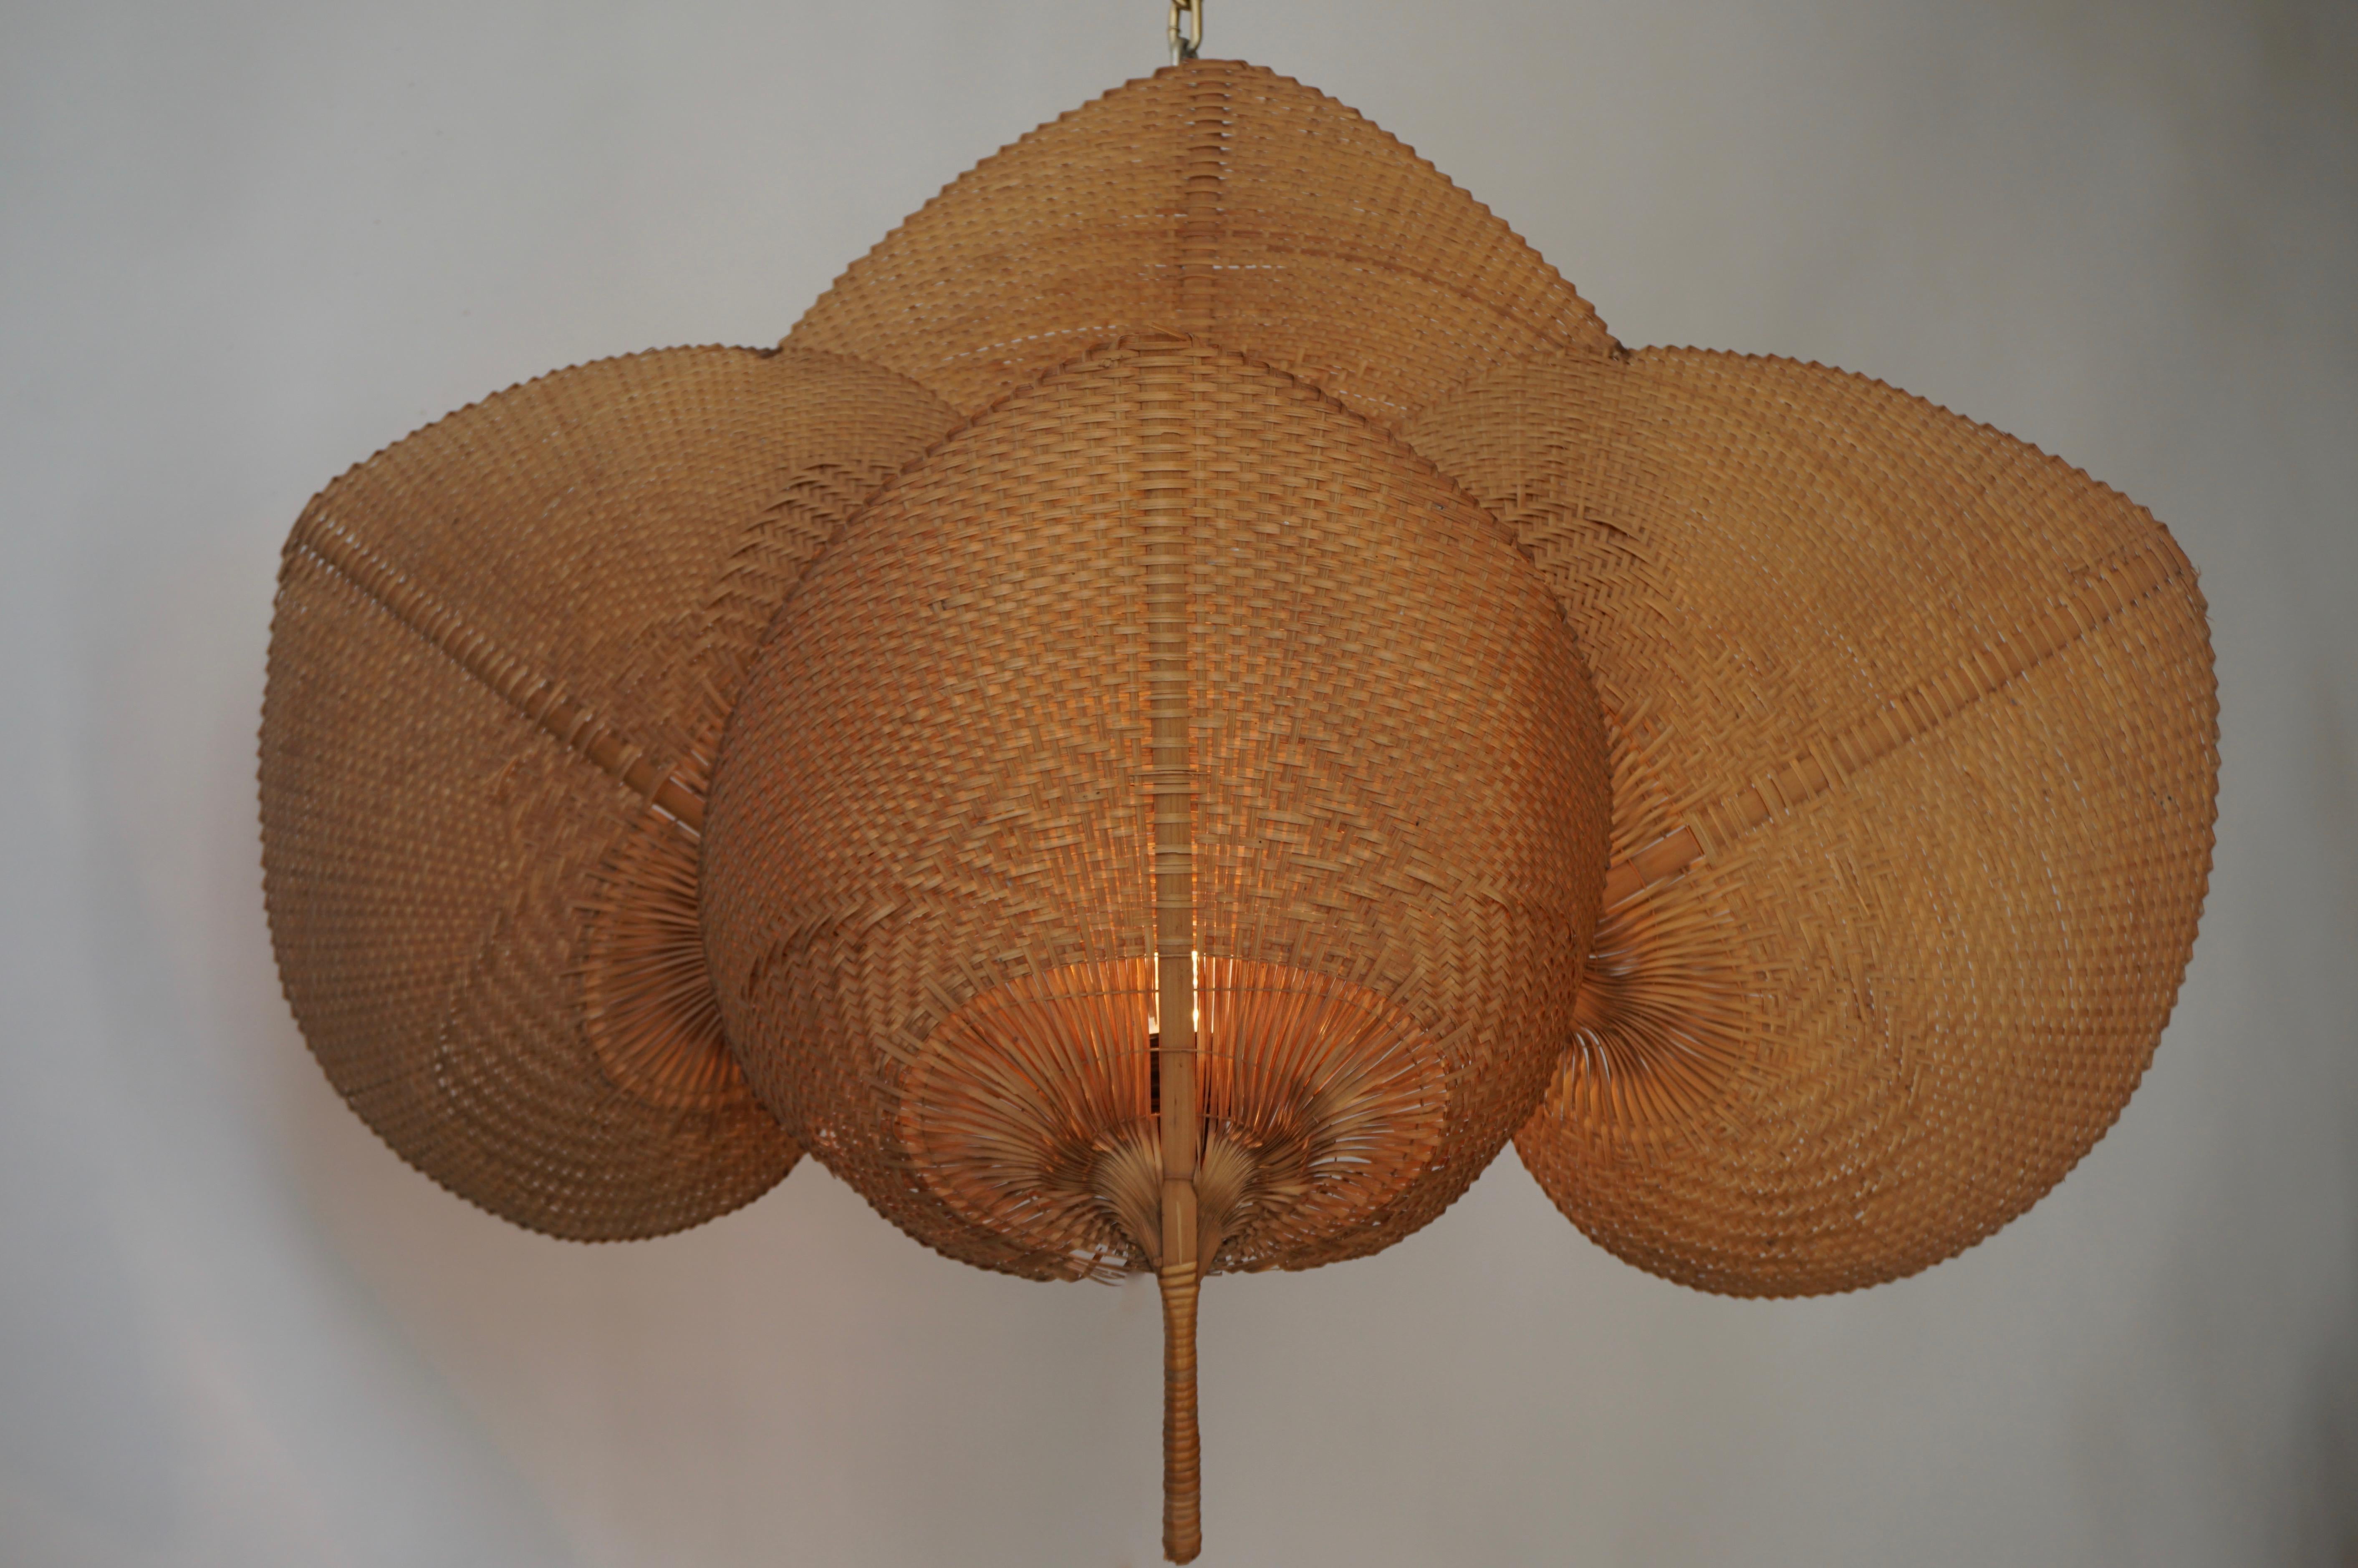 Rare and large 1950s wicker wall light in the style of Ingo Maurer.
These lamps were handmade from bamboo and wicker. They are very fragile and therefor very hard to find in good condition.
The lamp are connected to the wall by a metal wire